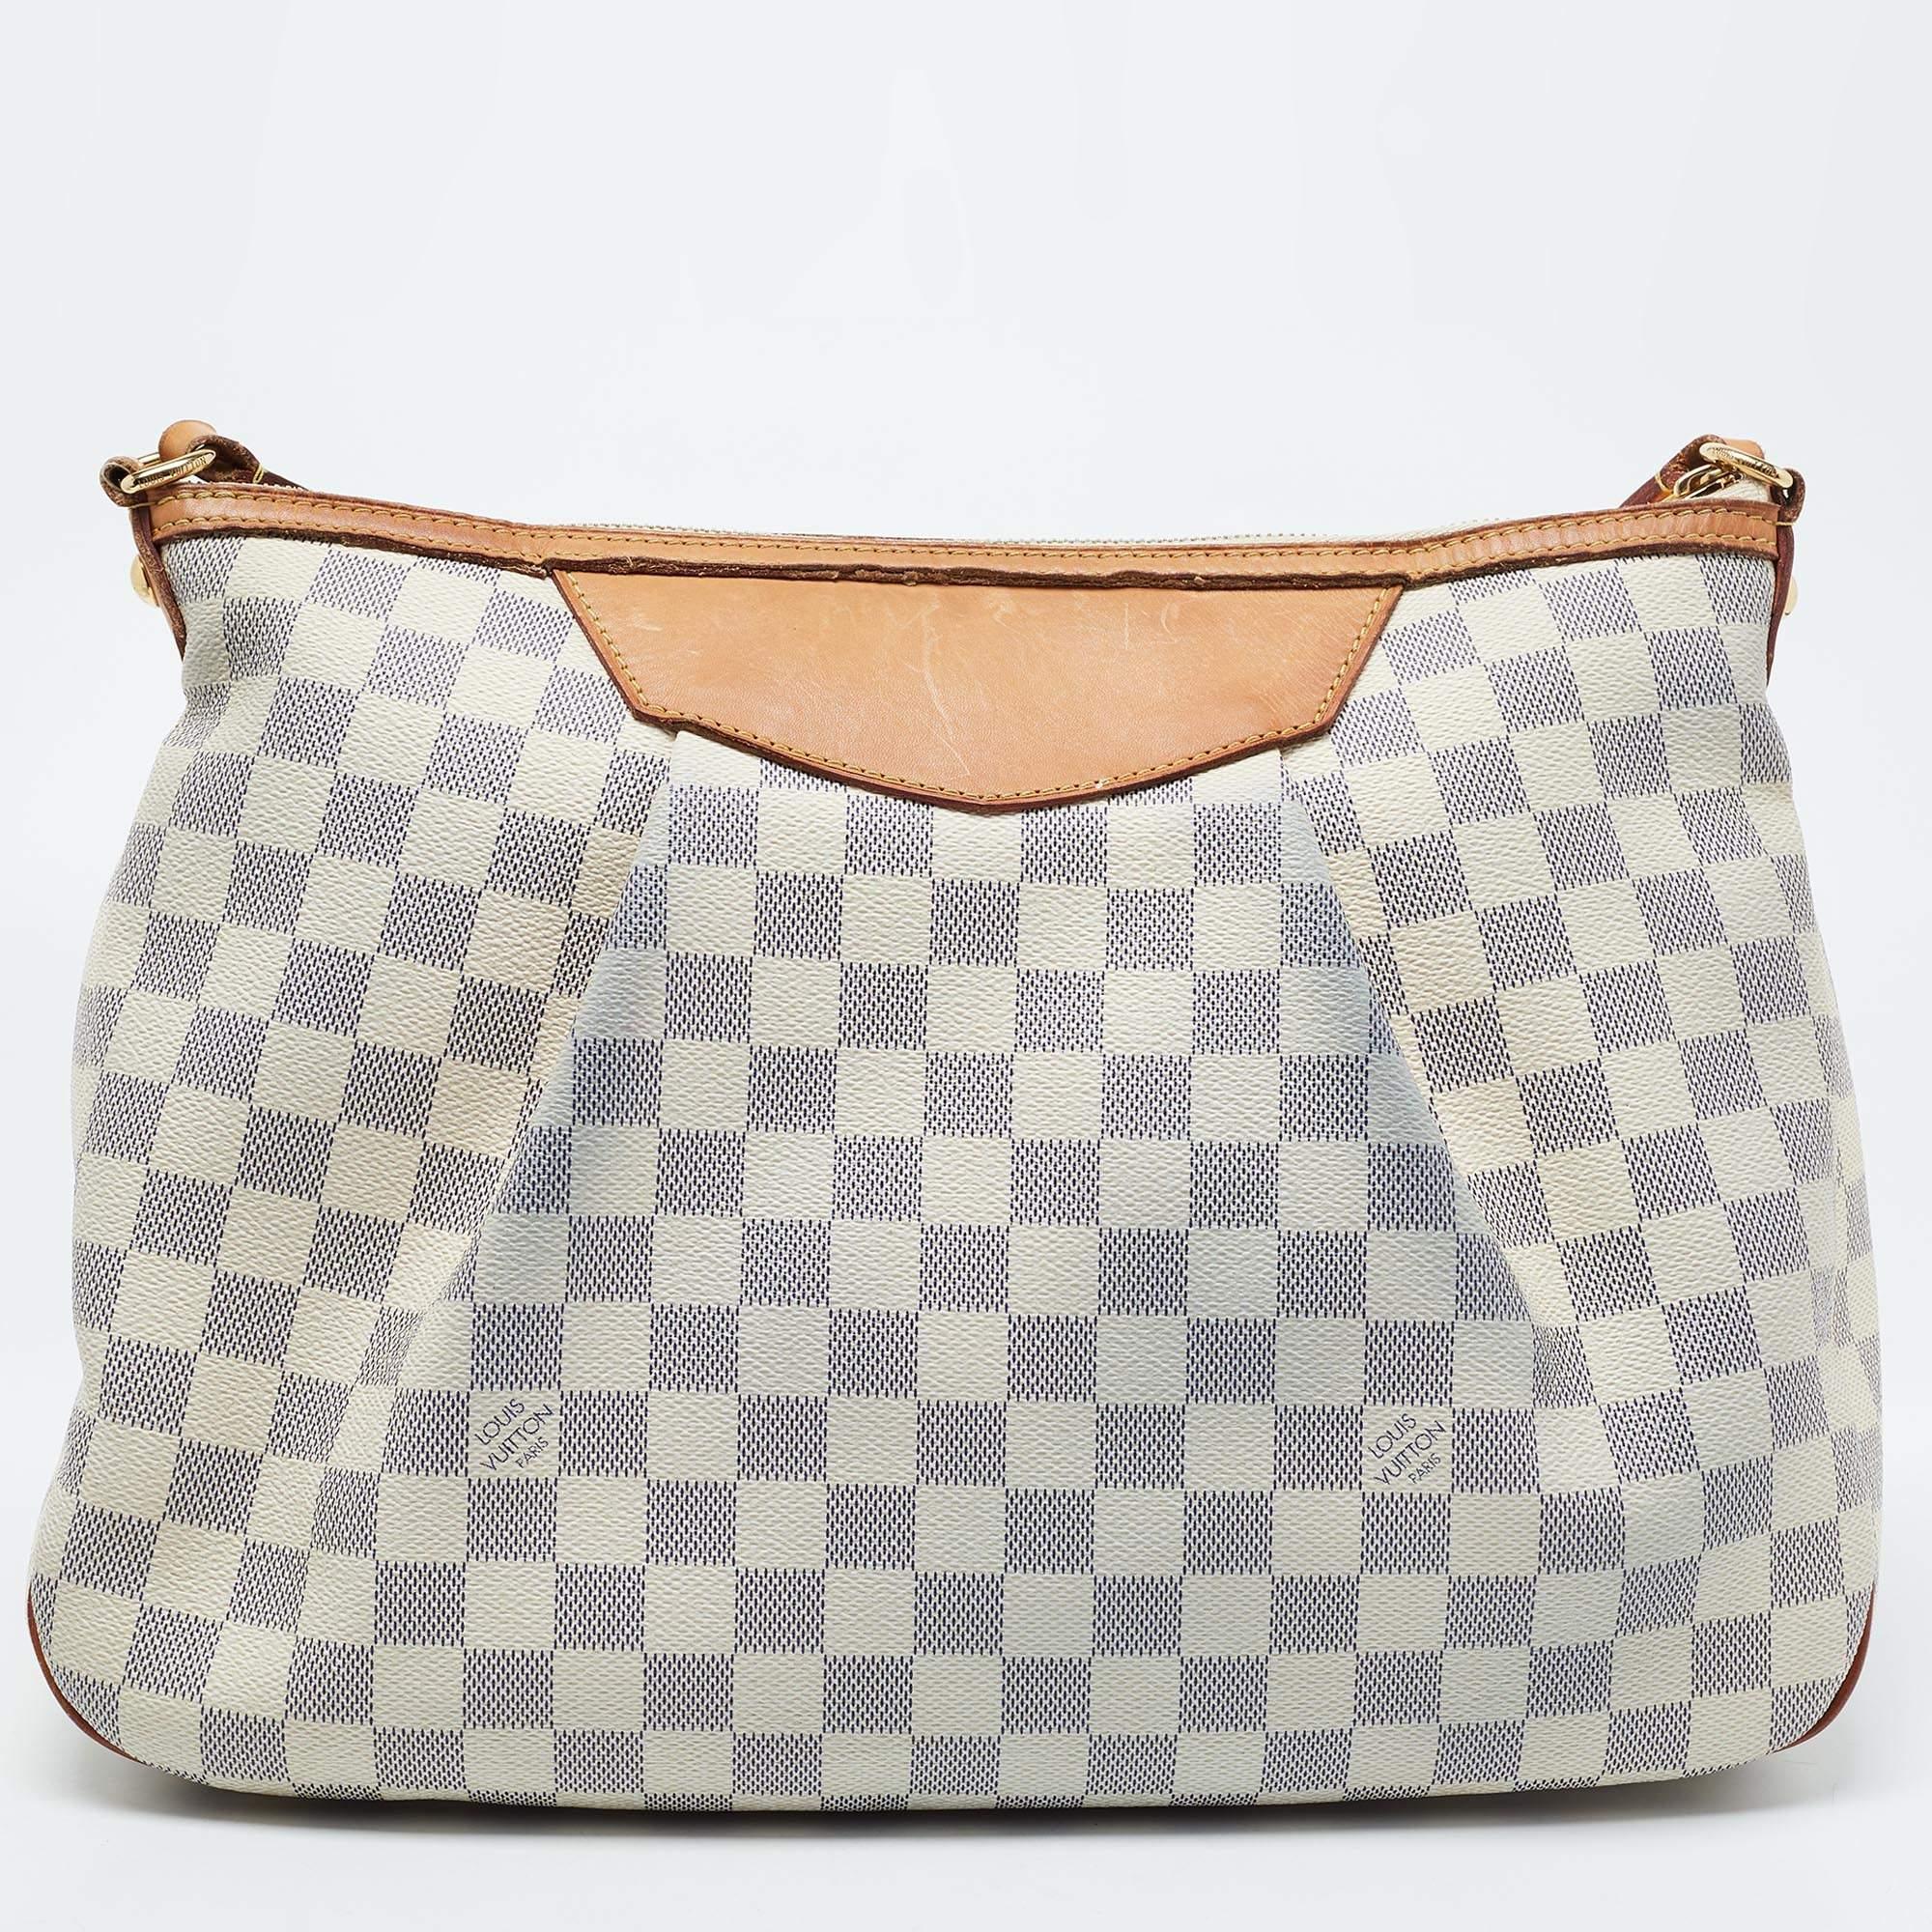 Louis Vuitton’s Siracusa MM bag is a sophisticated accessory. It is created using Damier Azur canvas & leather on the exterior and comes with gold-tone metal fittings. It comes with an adjustable shoulder strap. Like every other LV creation, this